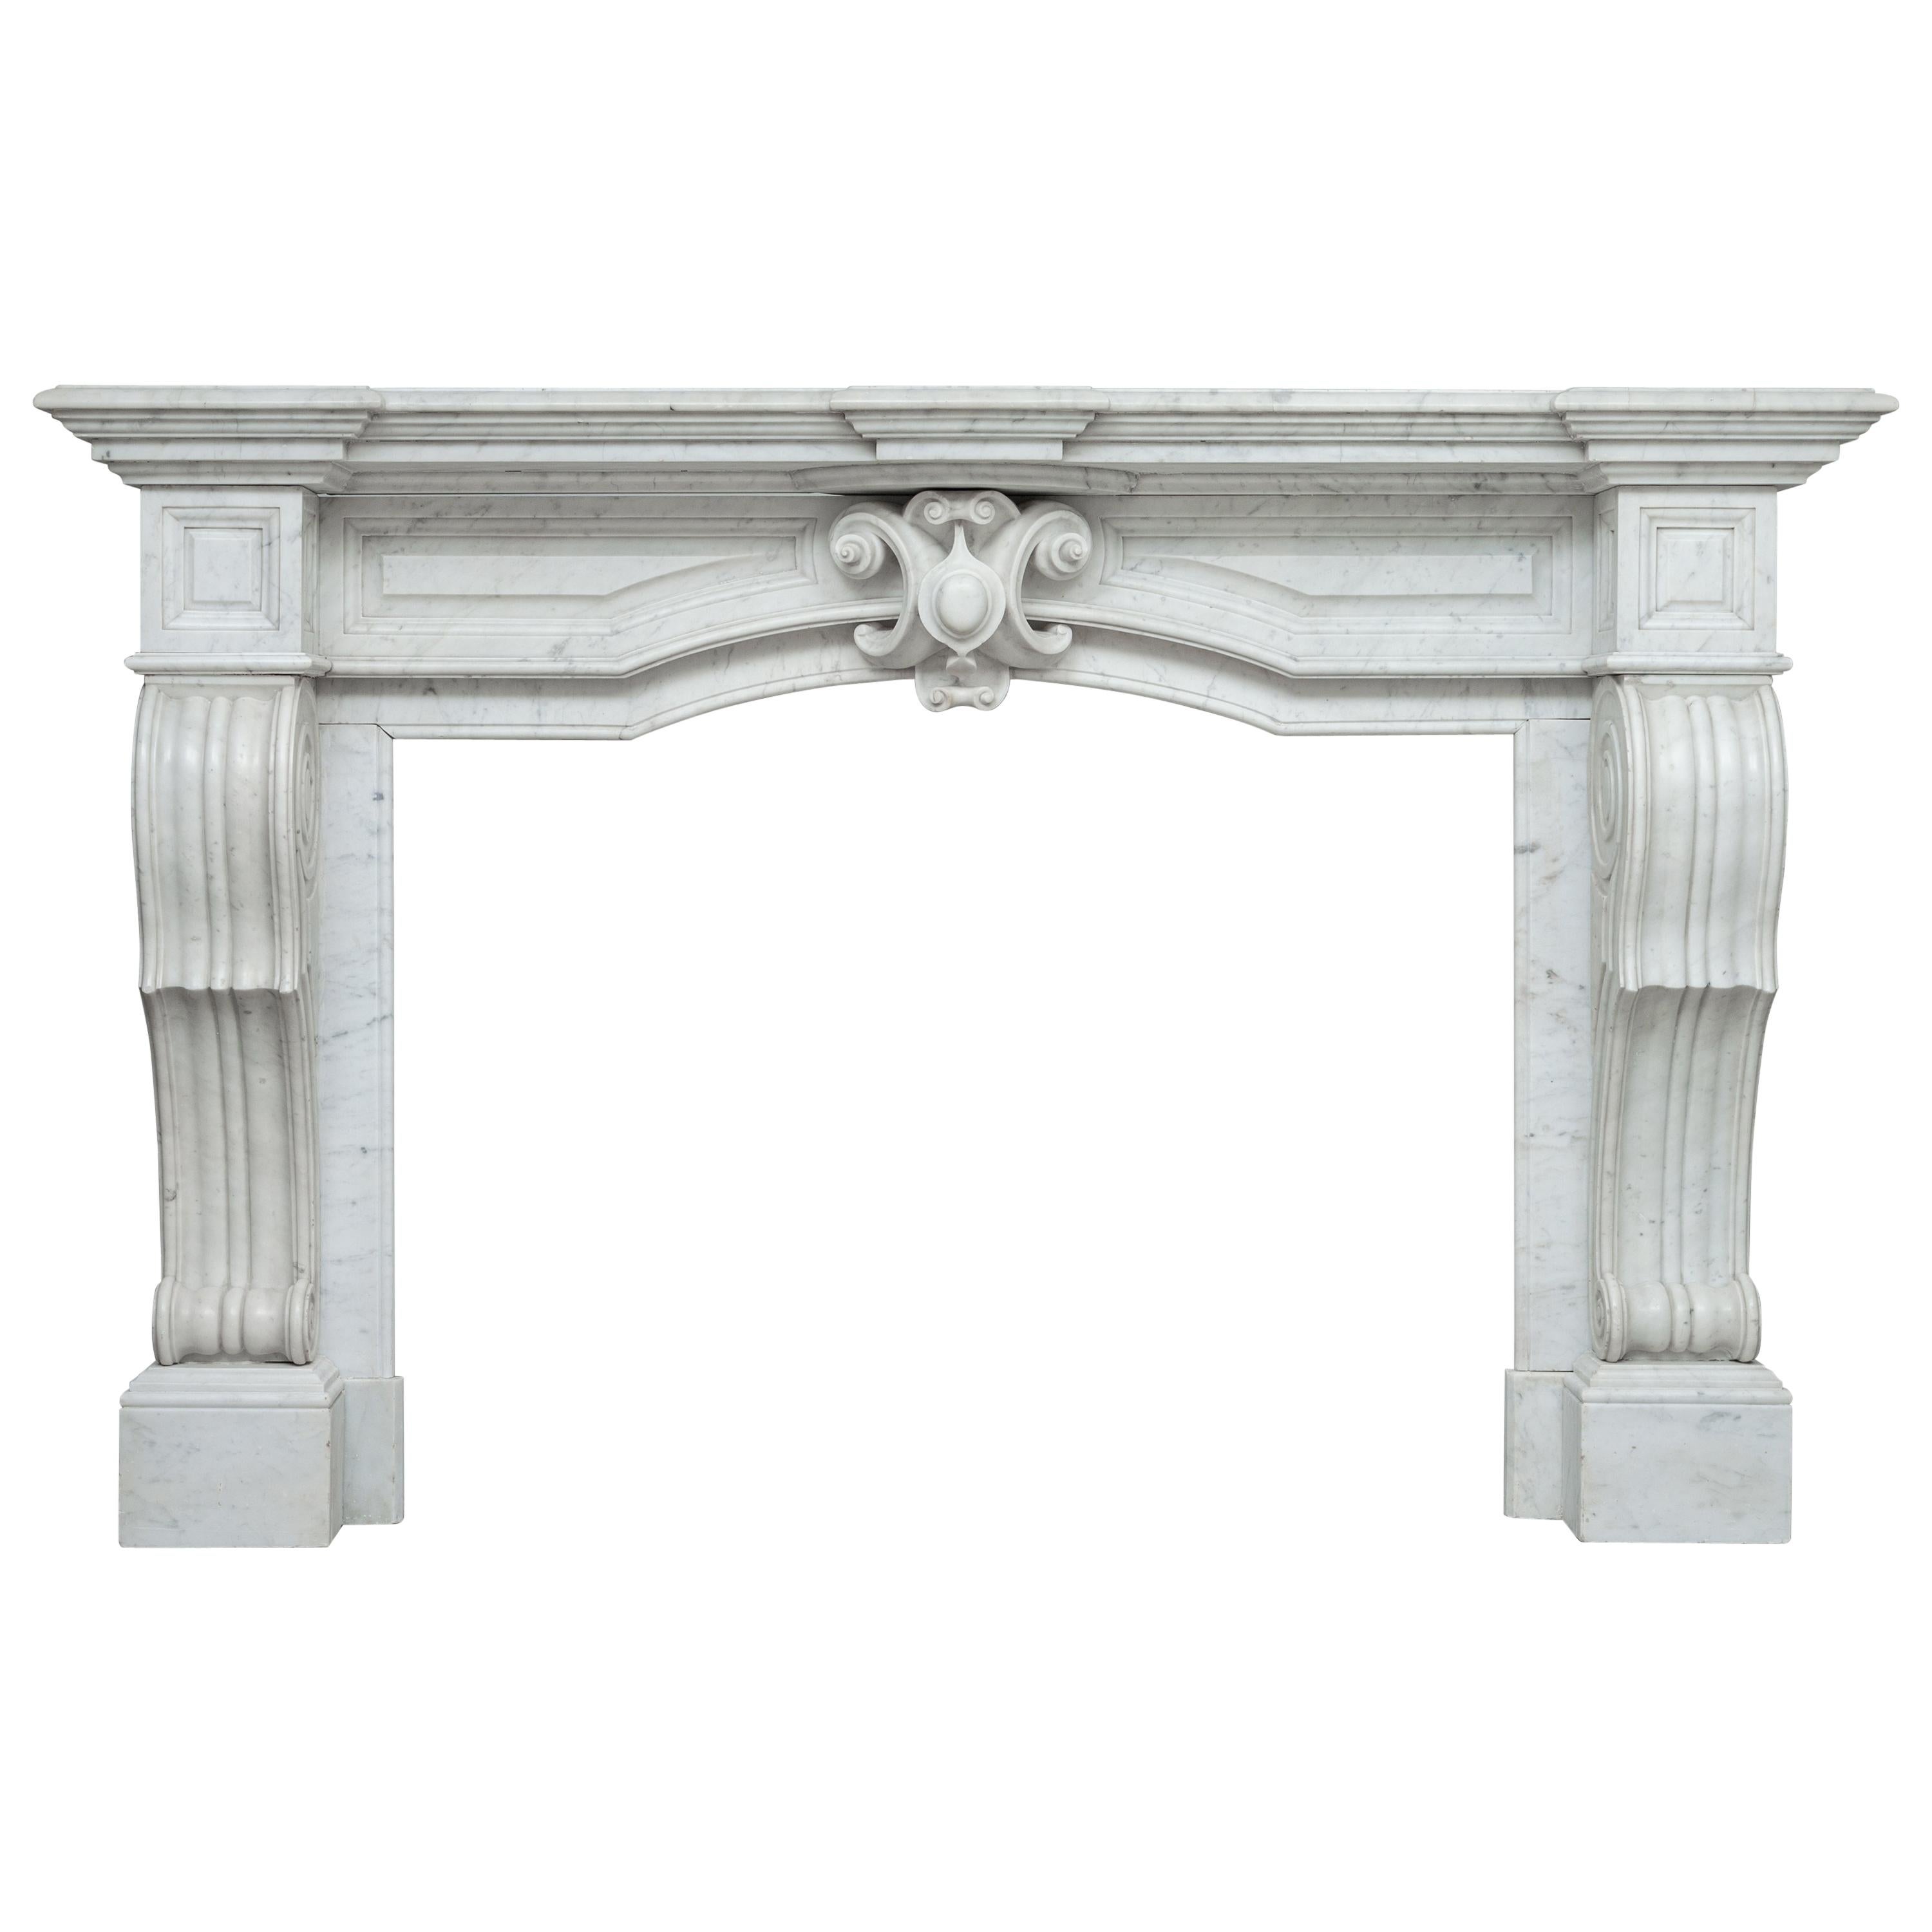 Neoclassical French Carrara White Marble Antique Fireplace For Sale